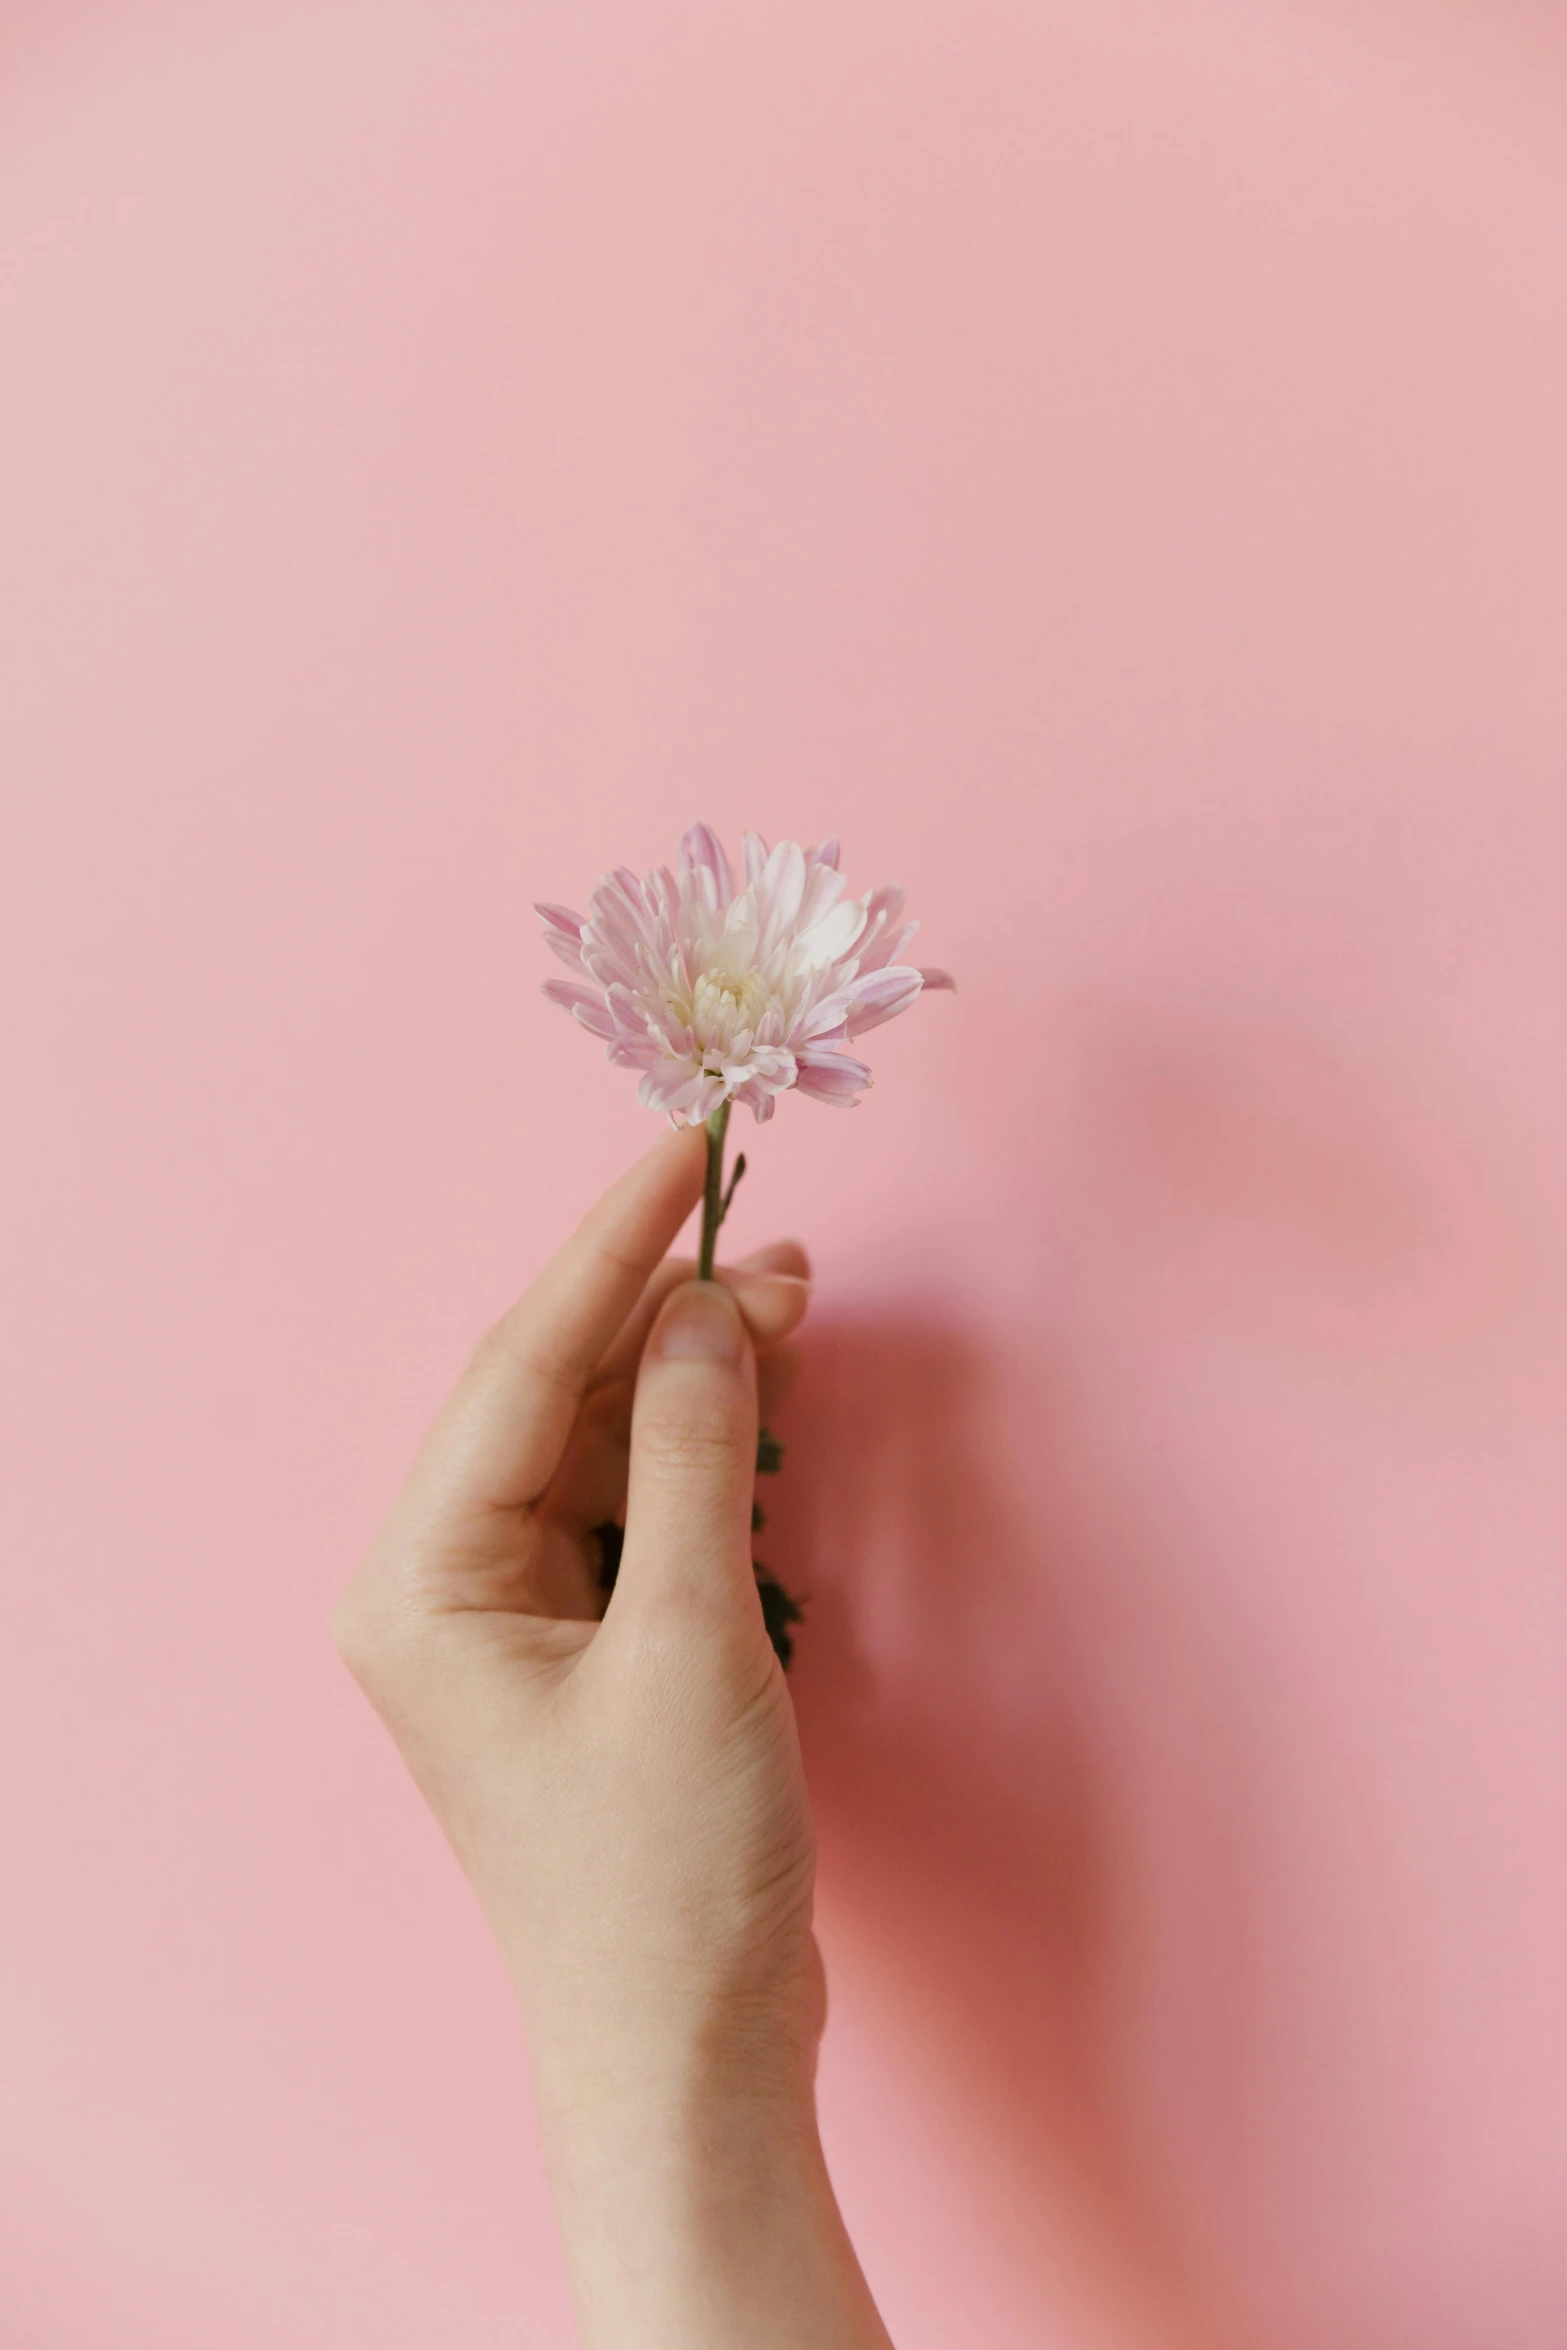 a hand holding a flower against a pink background, trending on unsplash, instagram picture, chrysanthemum eos-1d, portrait of small, stockphoto